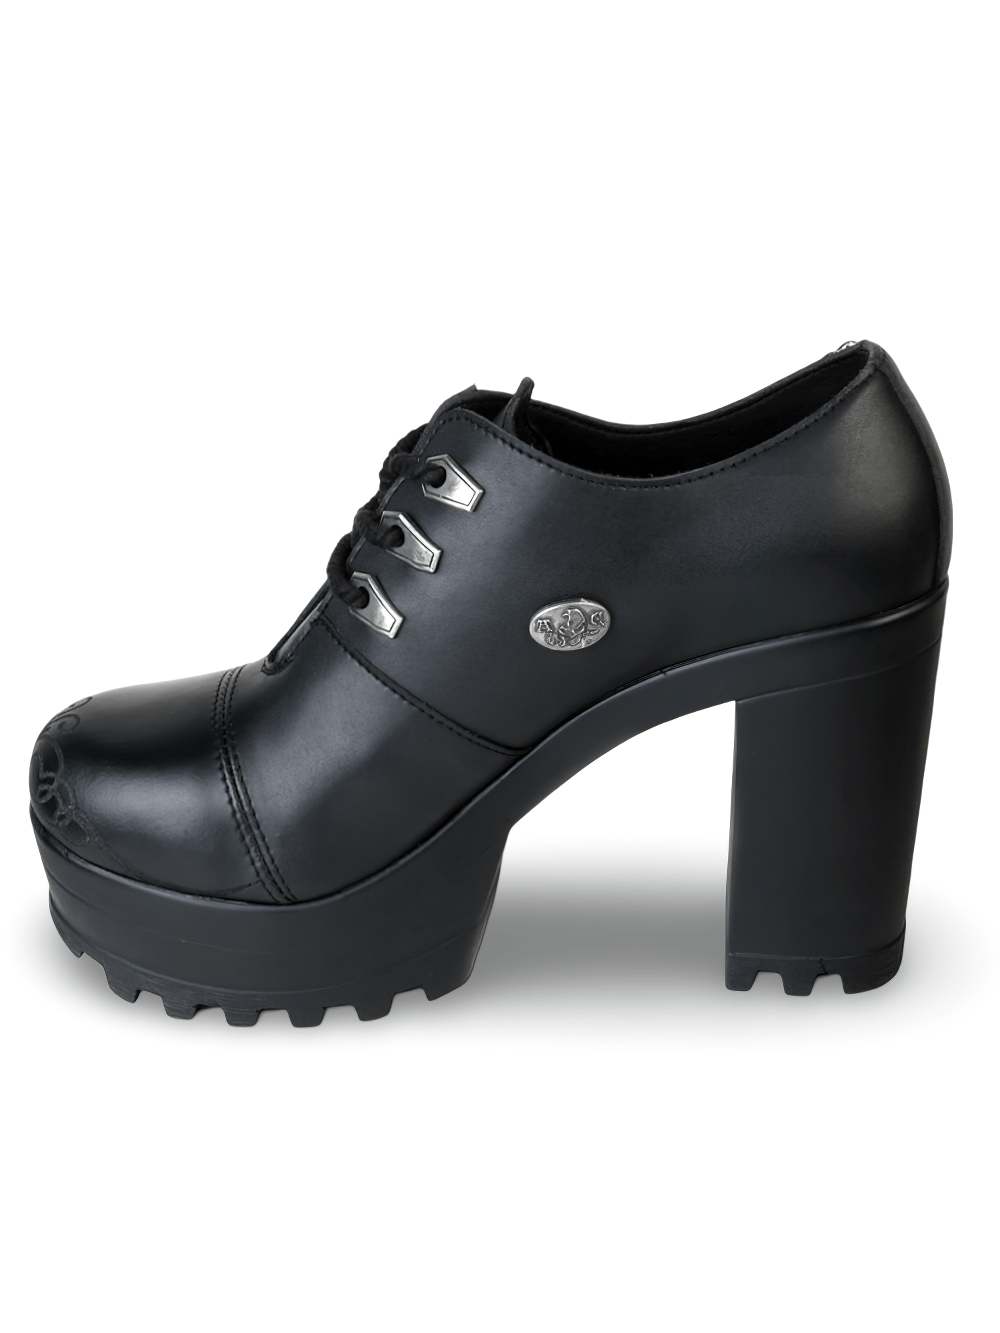 Black Vegan Leather Shoes with Platform and Lace-Up